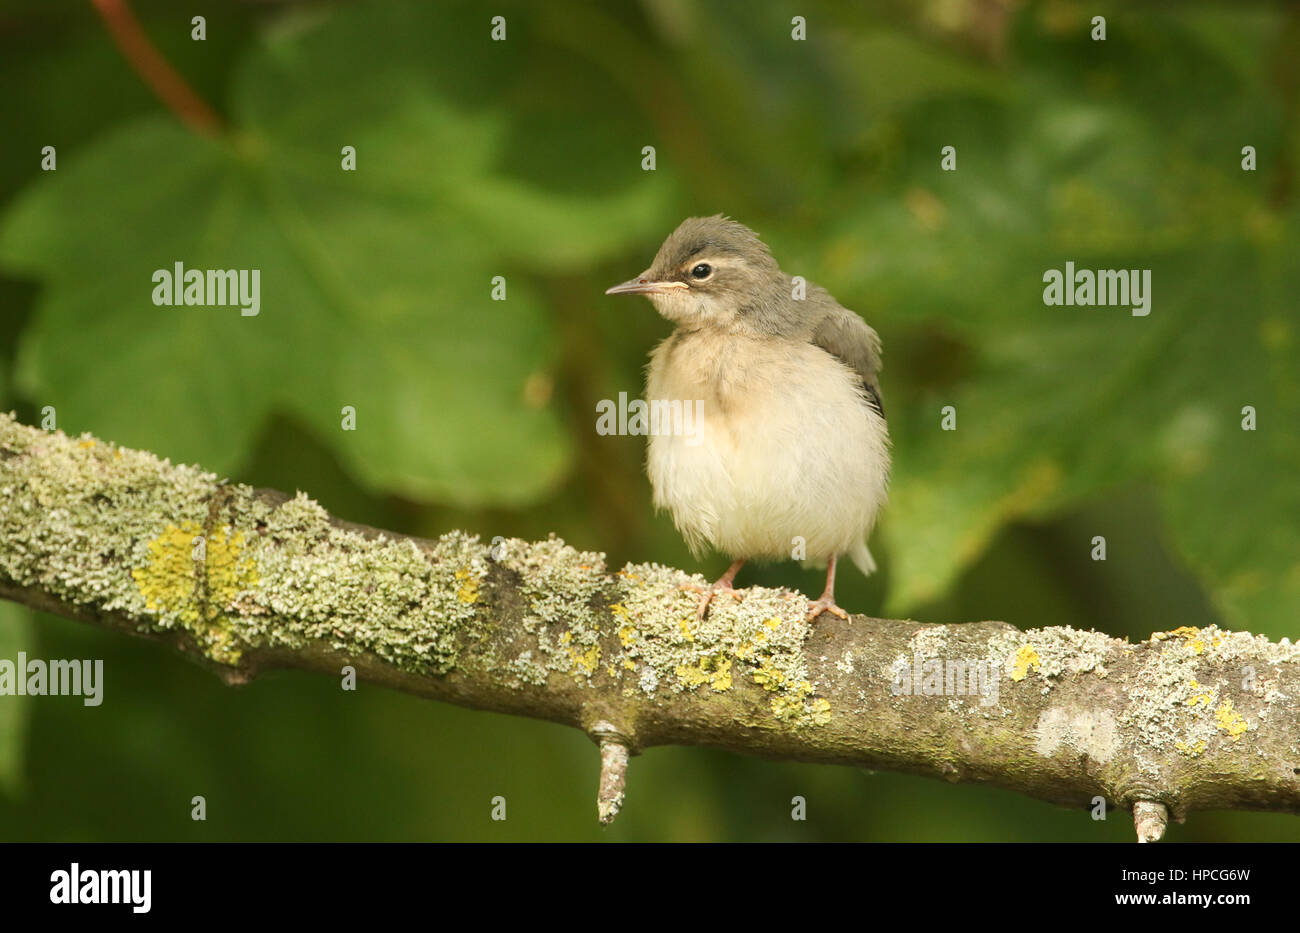 A cute baby Grey wagtail (Motacilla cinerea) perched on a lichen covered branch. Stock Photo